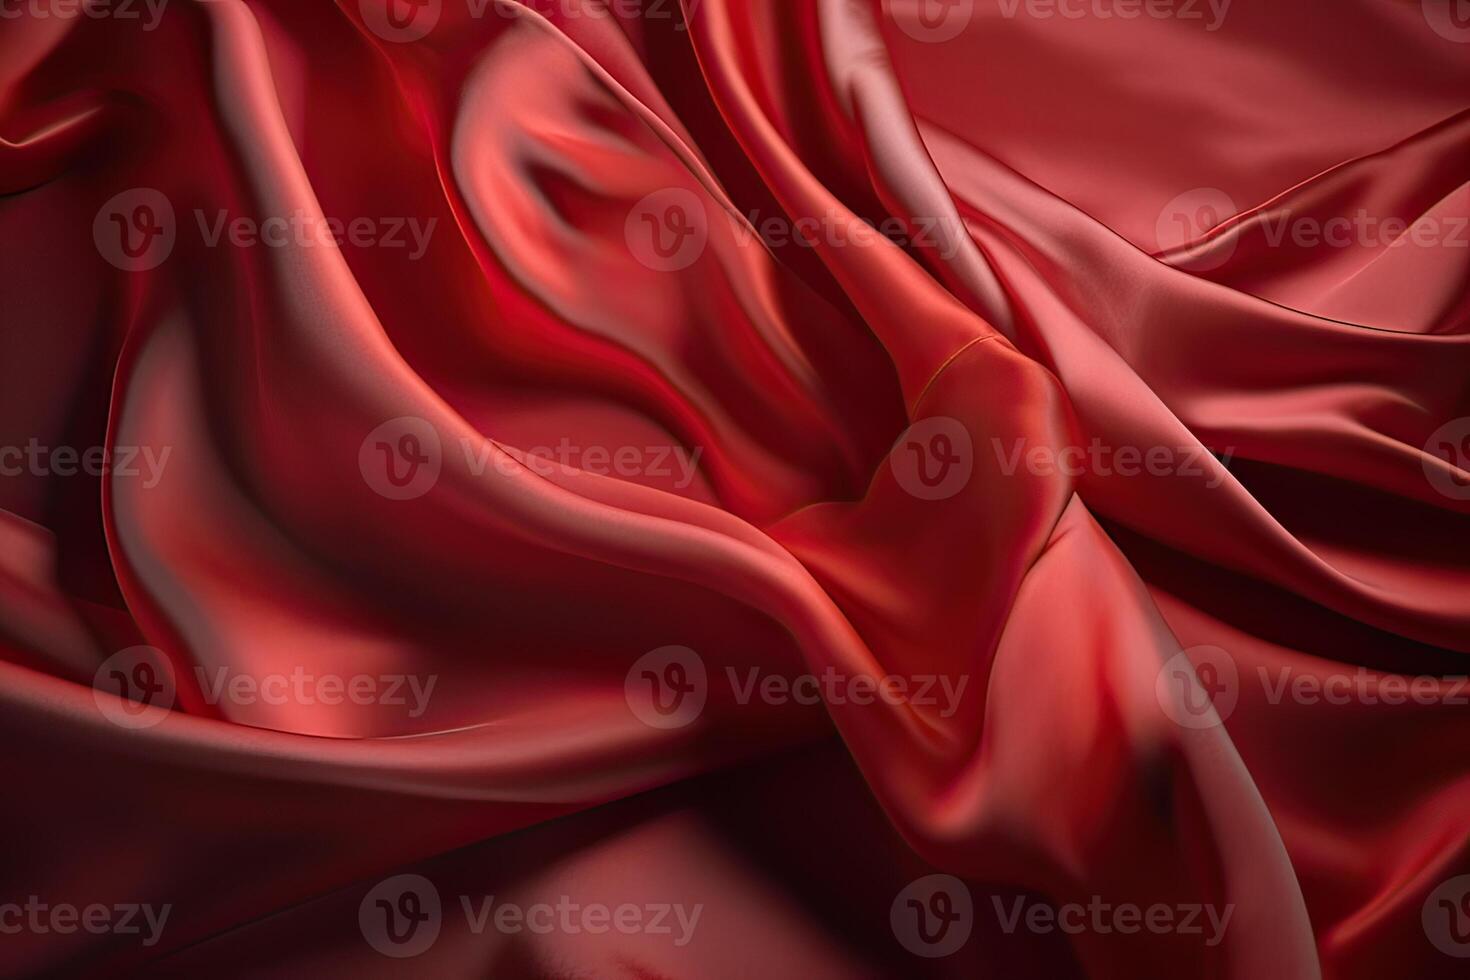 Premium Photo  Close-up texture of natural red or pink fabric or